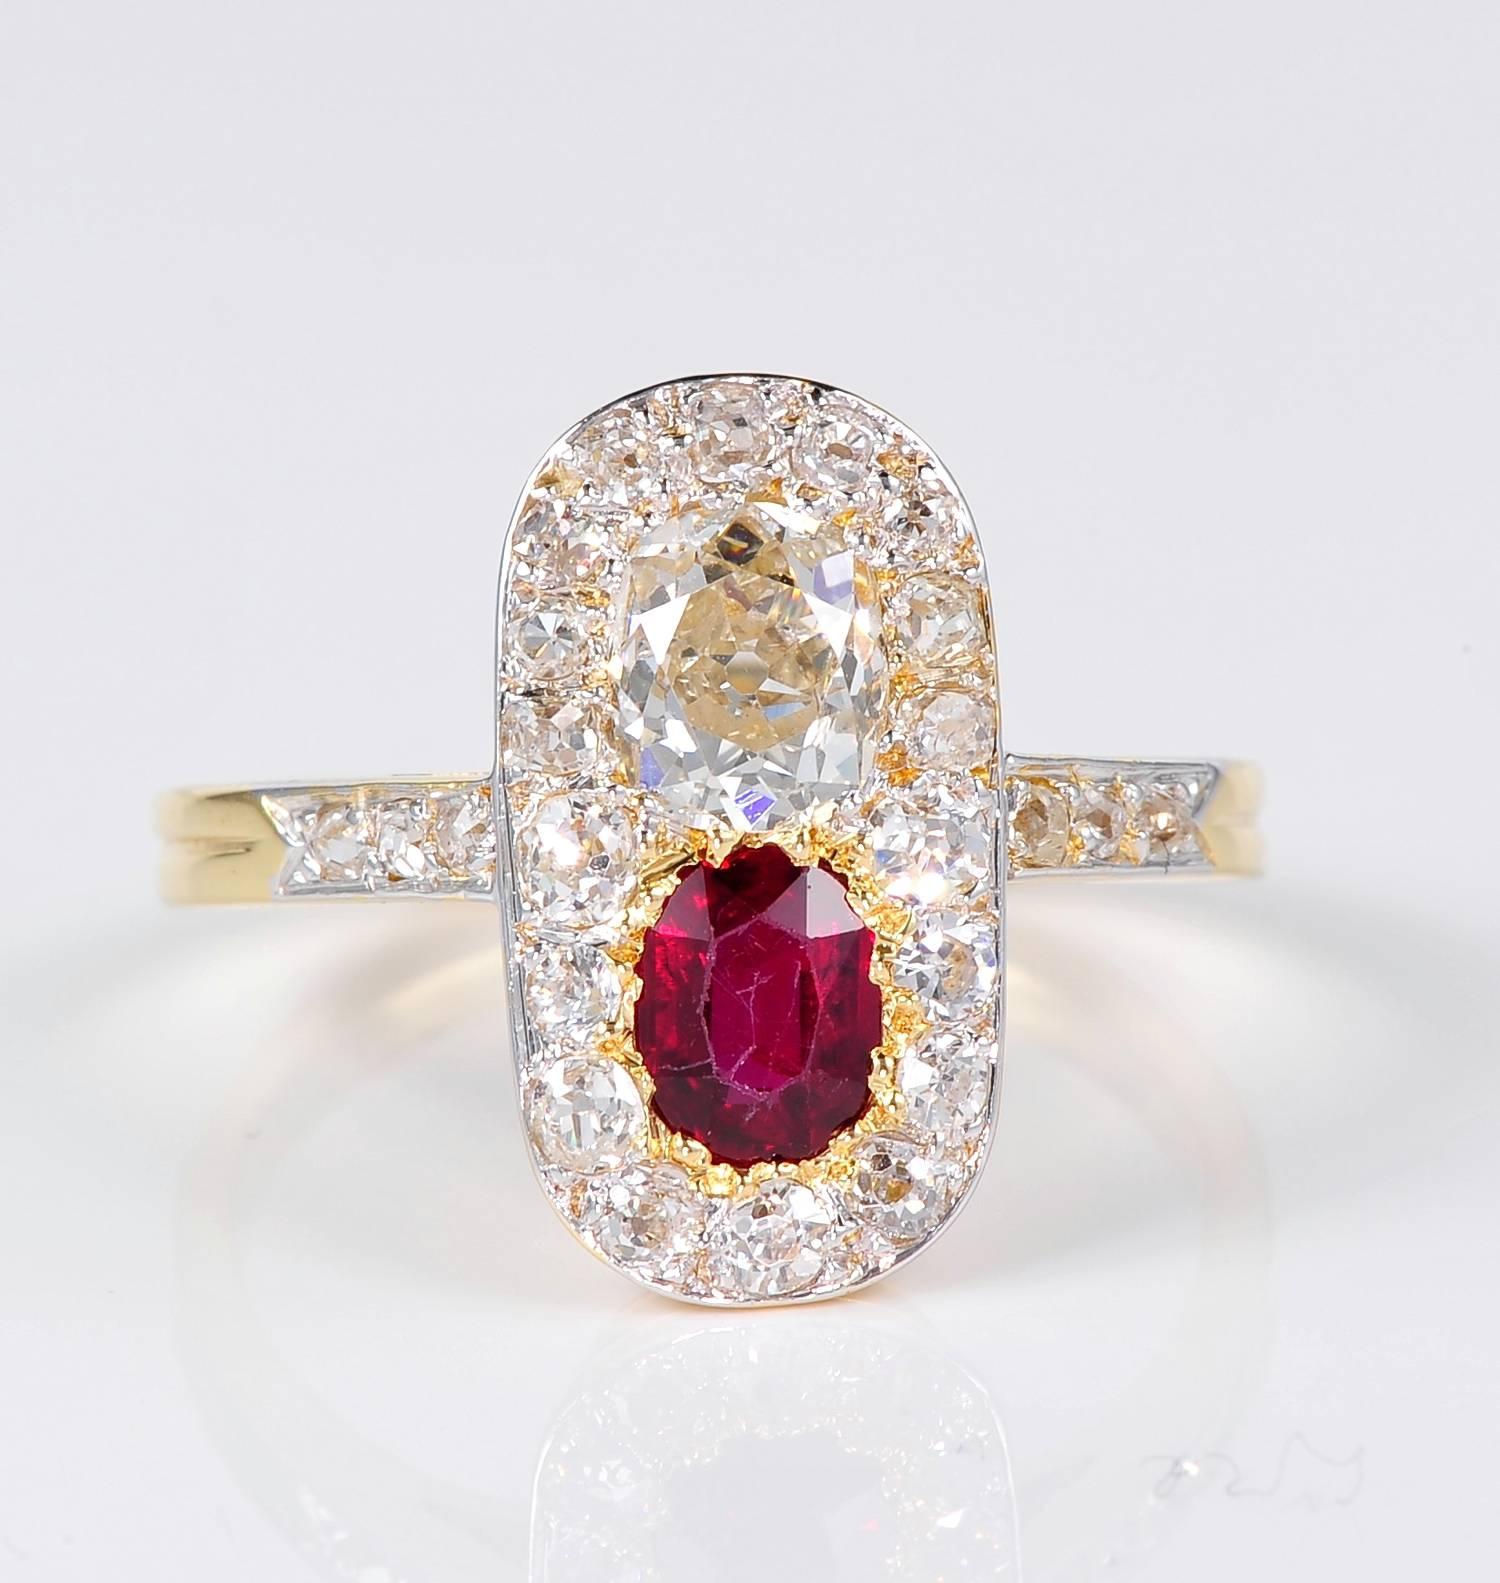 Eternal, not fearing time, Edwardian rare no heat Burma Ruby of the most vibrant red pigeoun blood colour .65 Ct. is set in a twin version
with an oval cushion cut old mine Diamond of deep cut being 1.0 Carat rated G/H VVS/SI
Surrounding border is